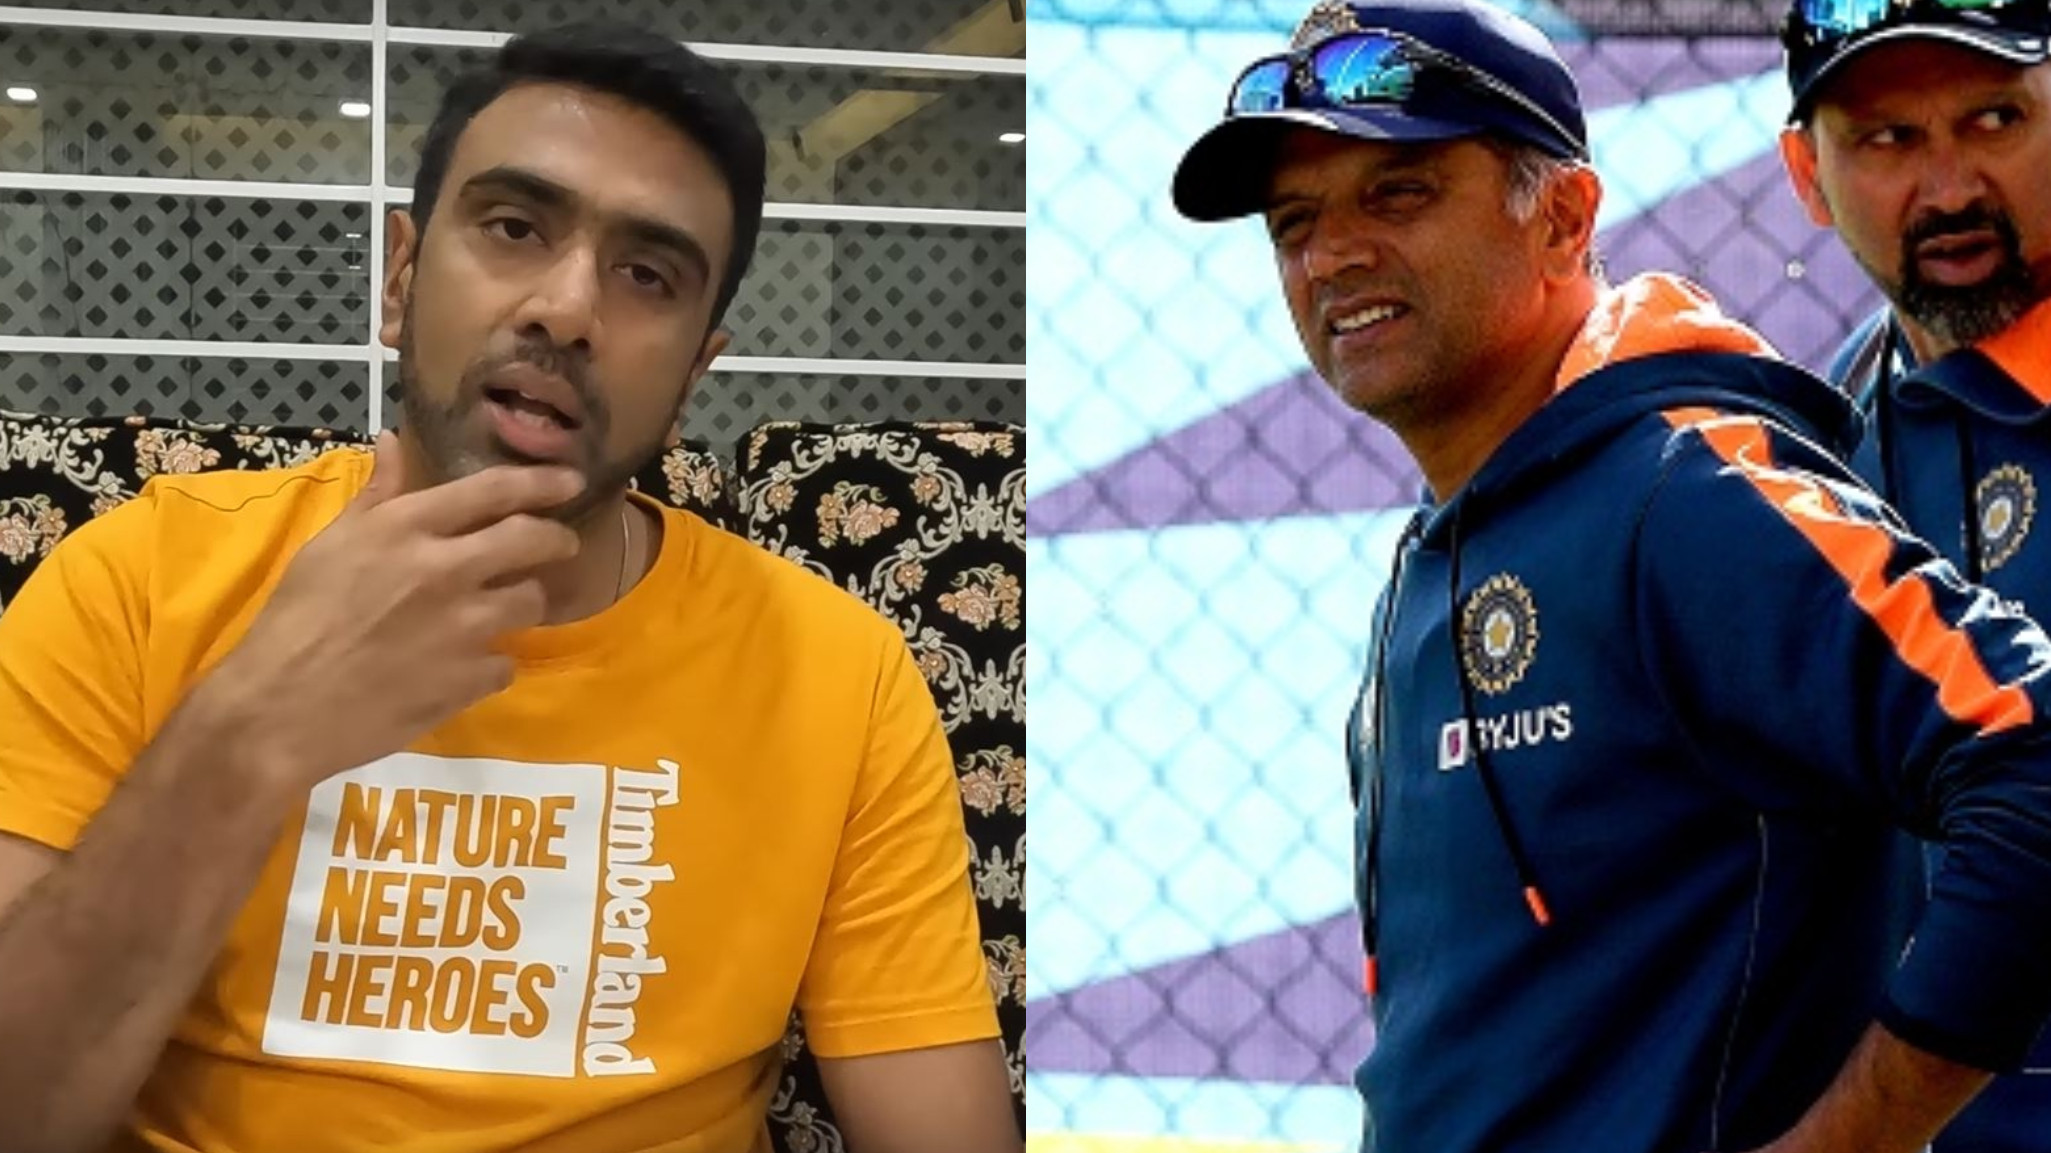 “What do you expect Dravid to reply?': Ashwin on Indian players in overseas T20 leagues debate